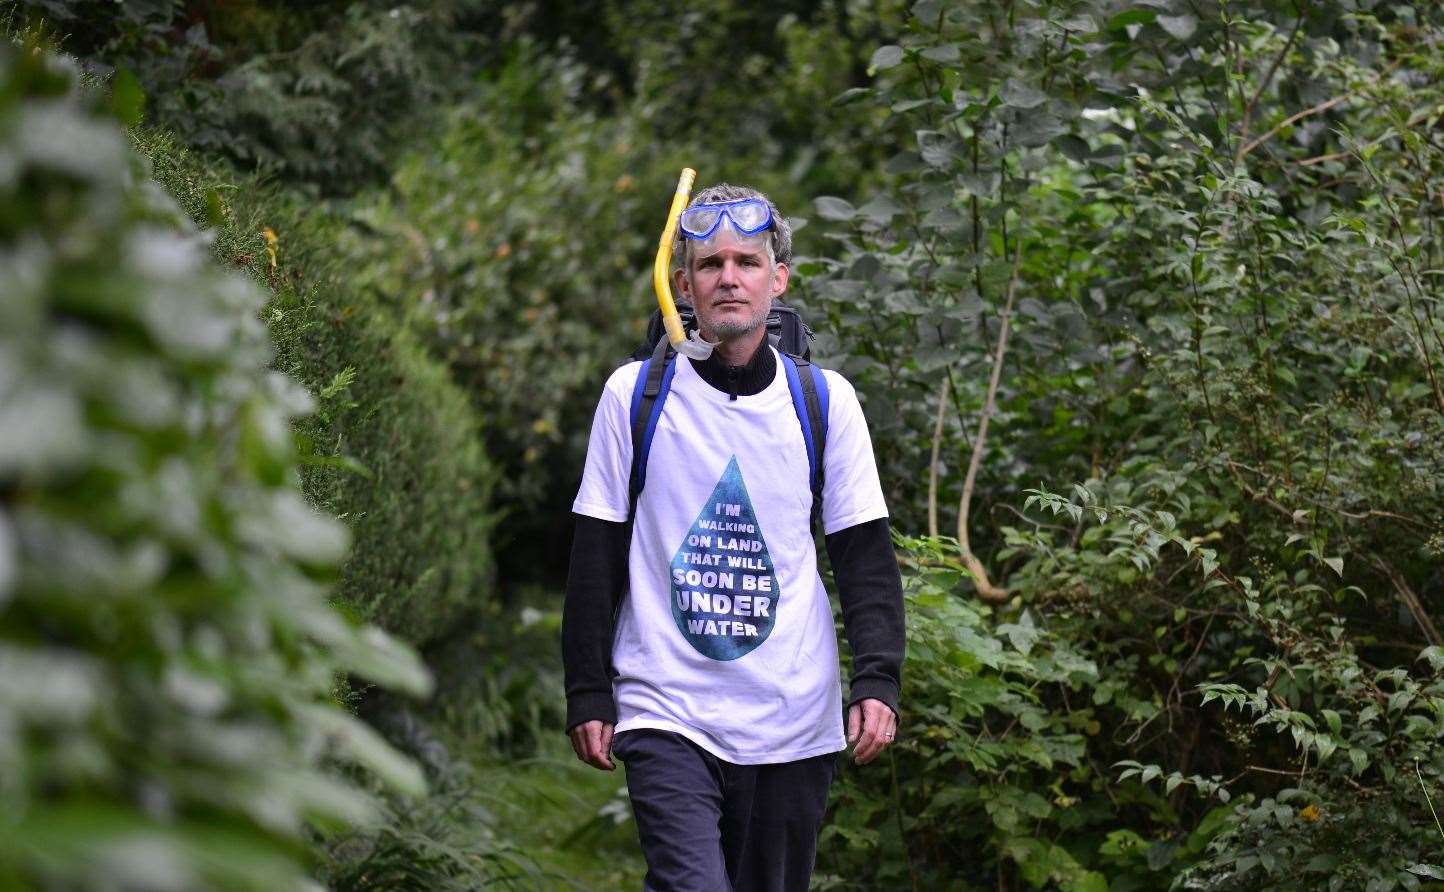 Dr Gardner will be walking 180 miles for the cause. (Picture: Louise Gardner)